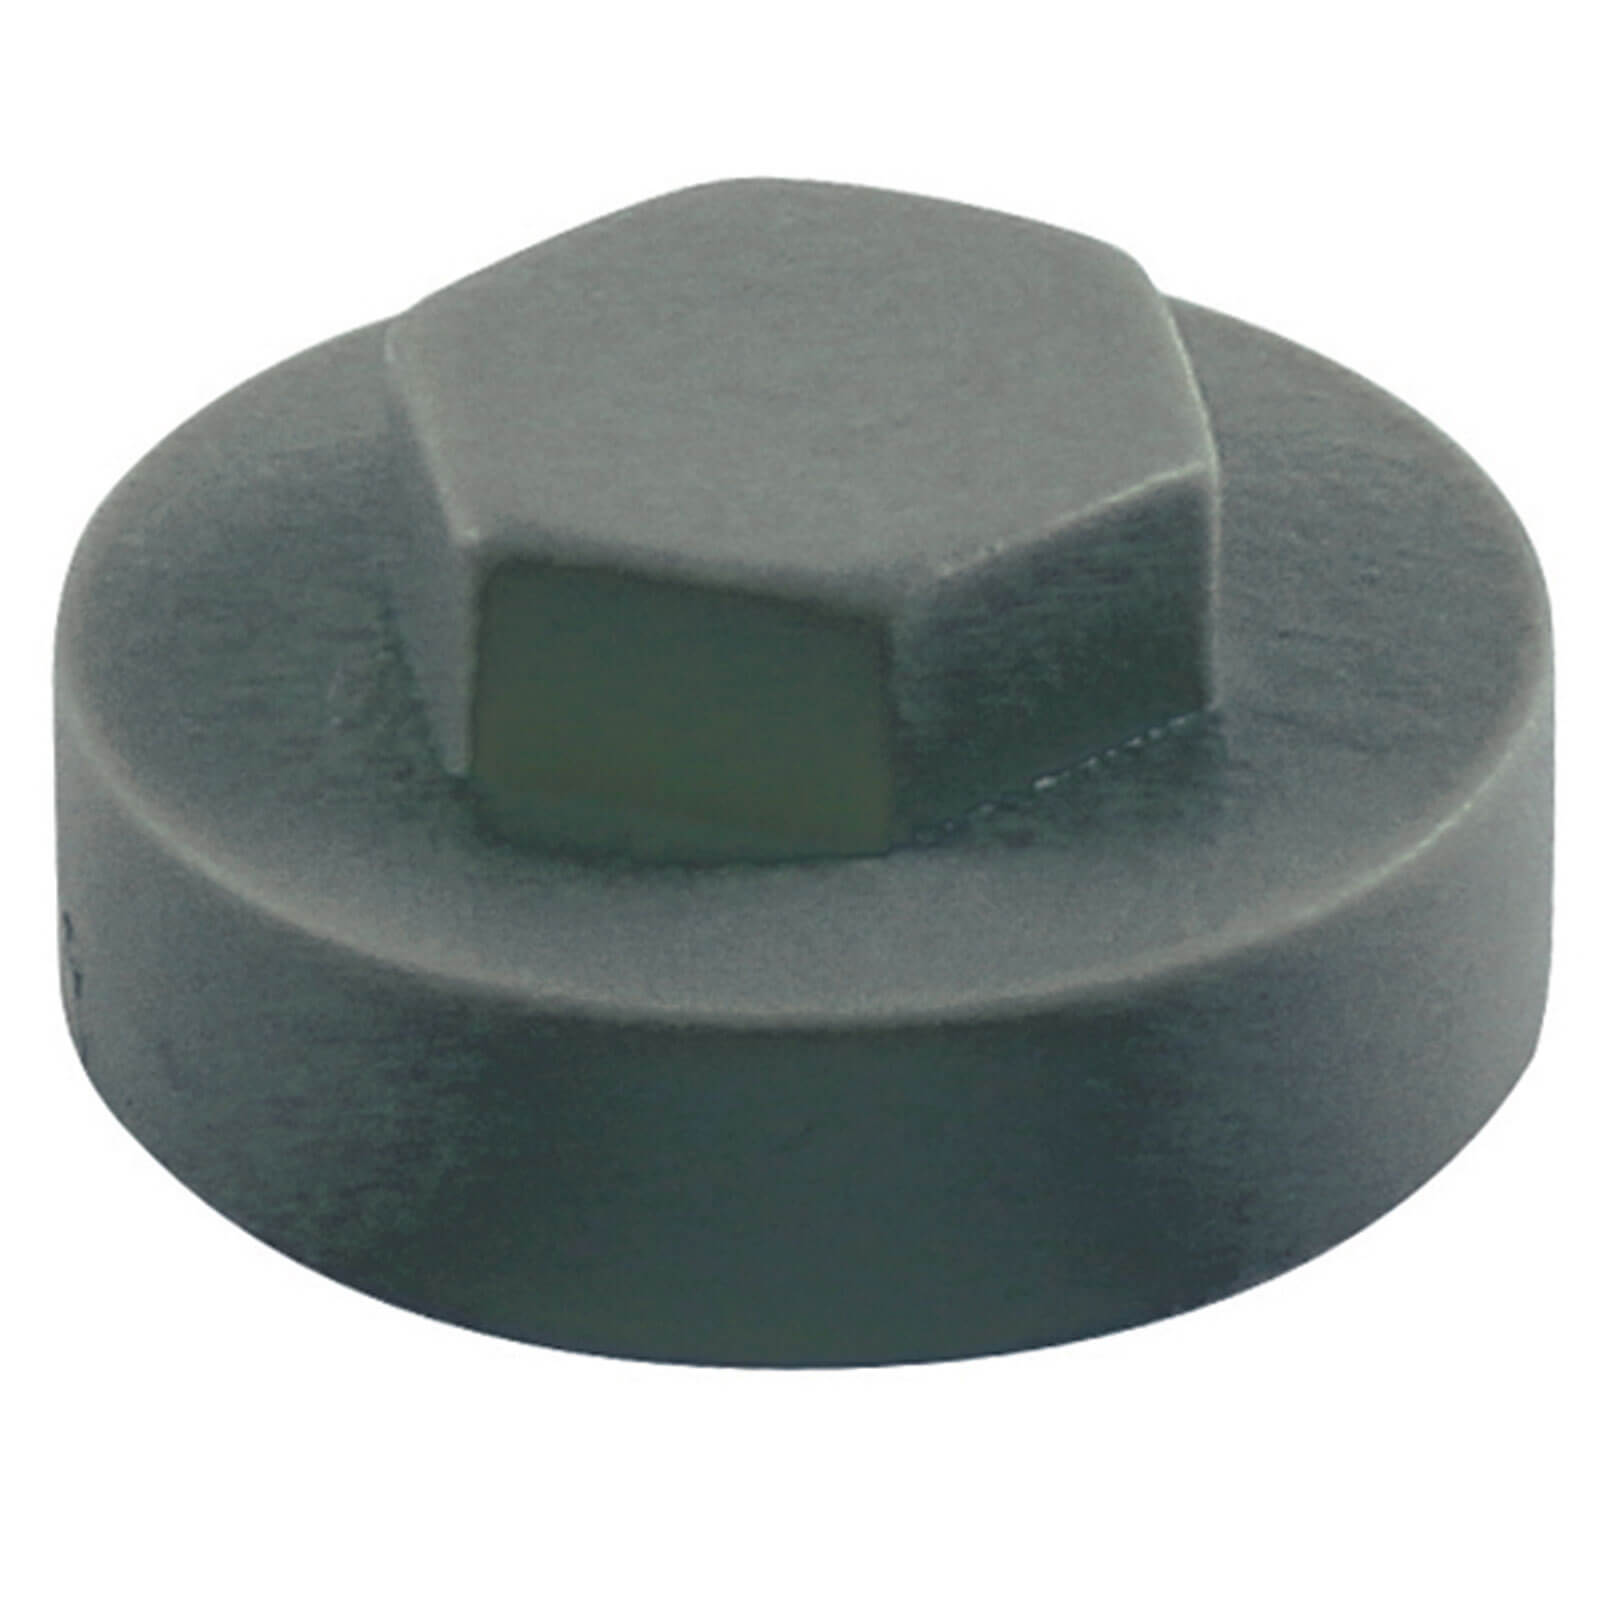 Image of Colour Match Hexagon Screw Cover Cap 5/16" x 16mm Slate Grey Pack of 1000